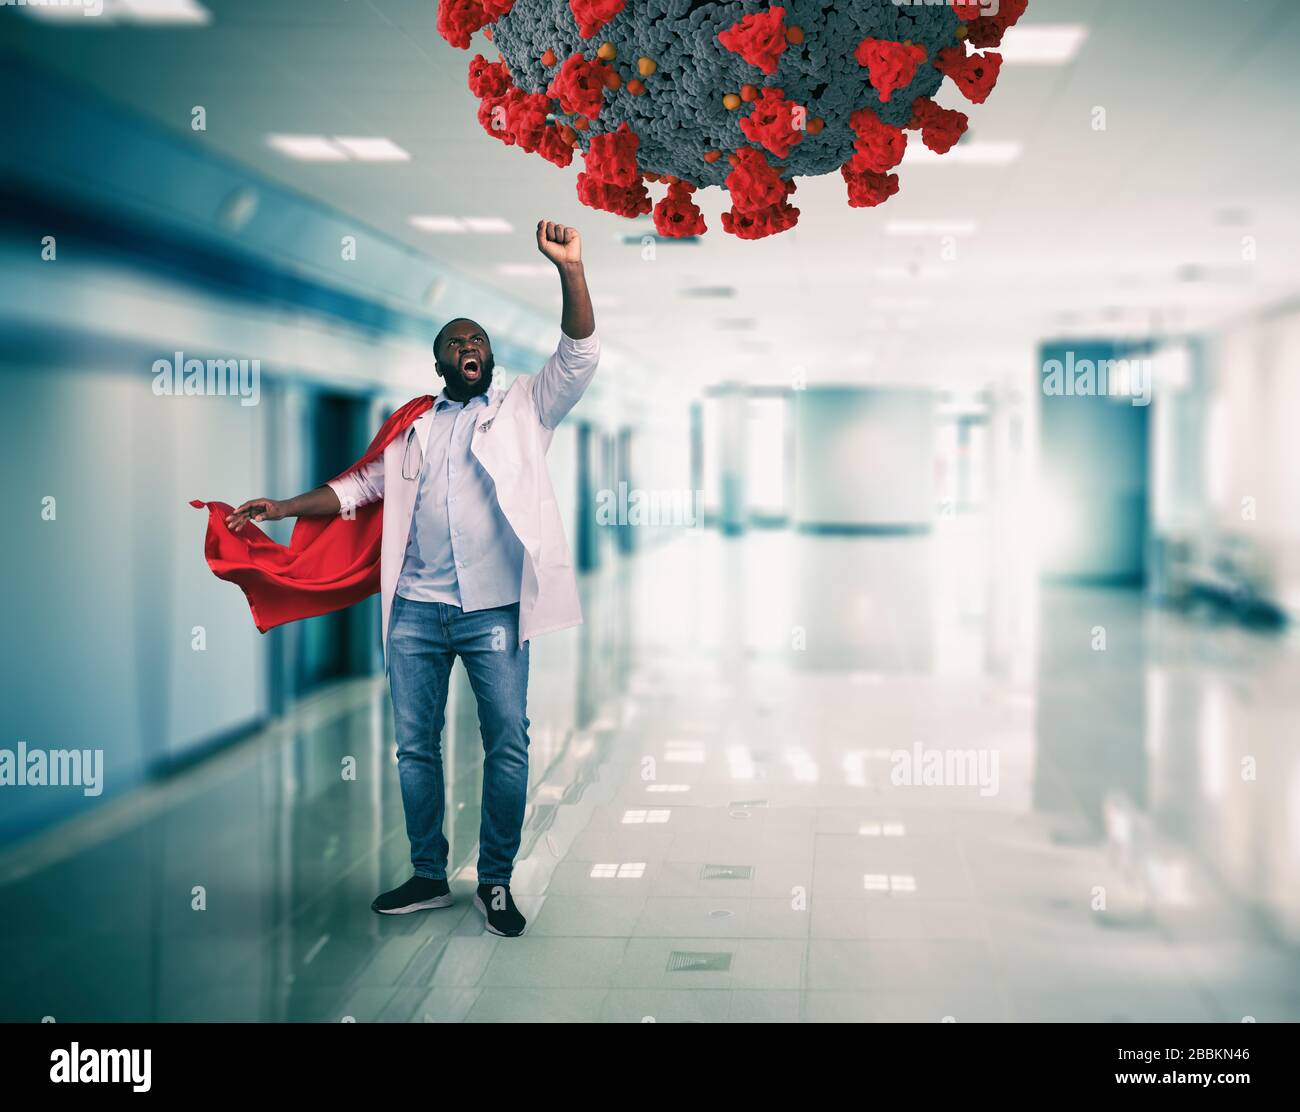 Super hero doctor with red cloak fights against a big virus Stock Photo